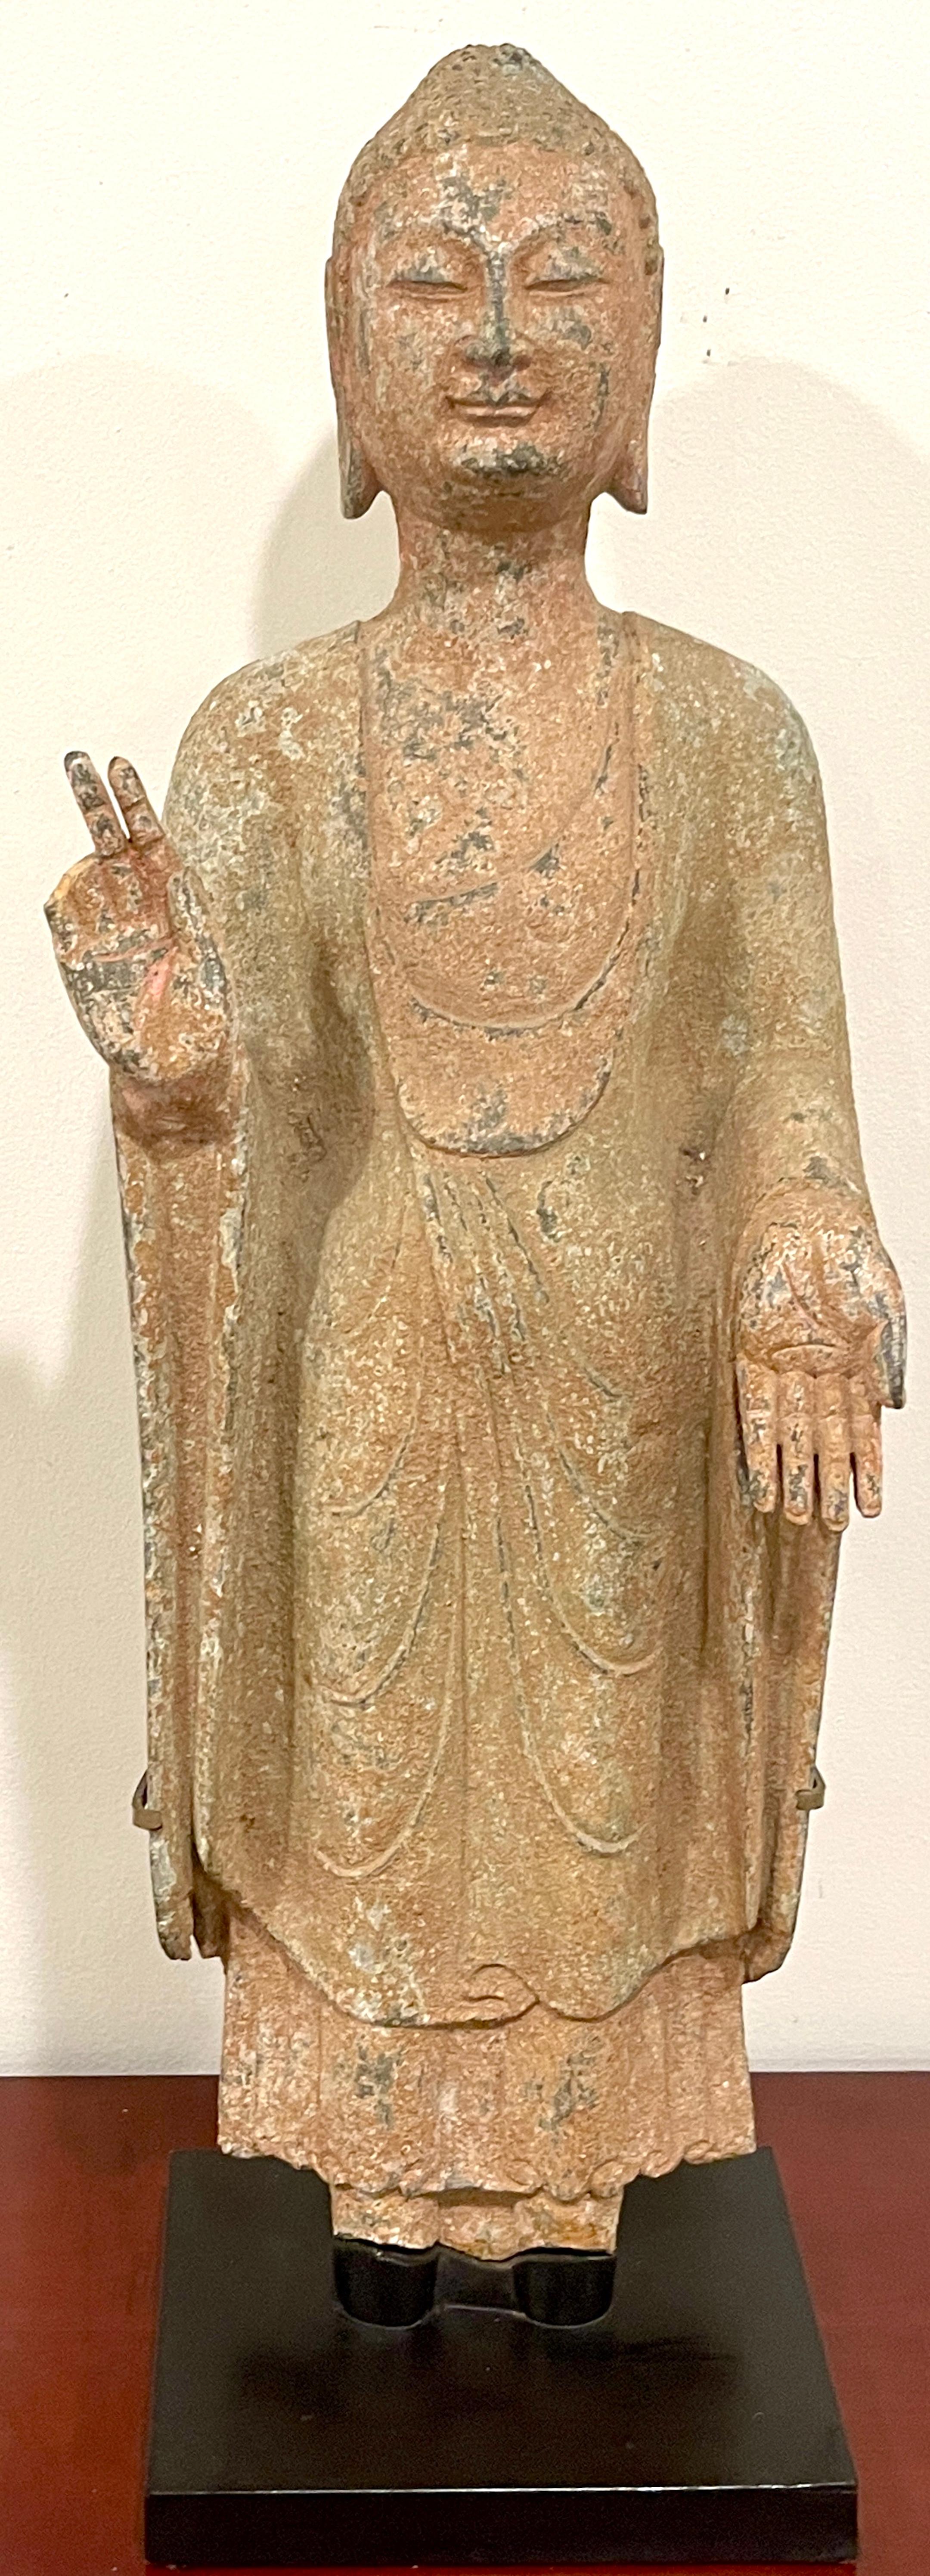 Ming Dynasty Polychrome Grey Stone Standing Buddha, Museum Mounted (1368-1644) 

A polychrome gray stone sculpture of Buddha stands, wearing layered robes that cover most of the body, leaving only a part of the chest uncovered. The left arm is